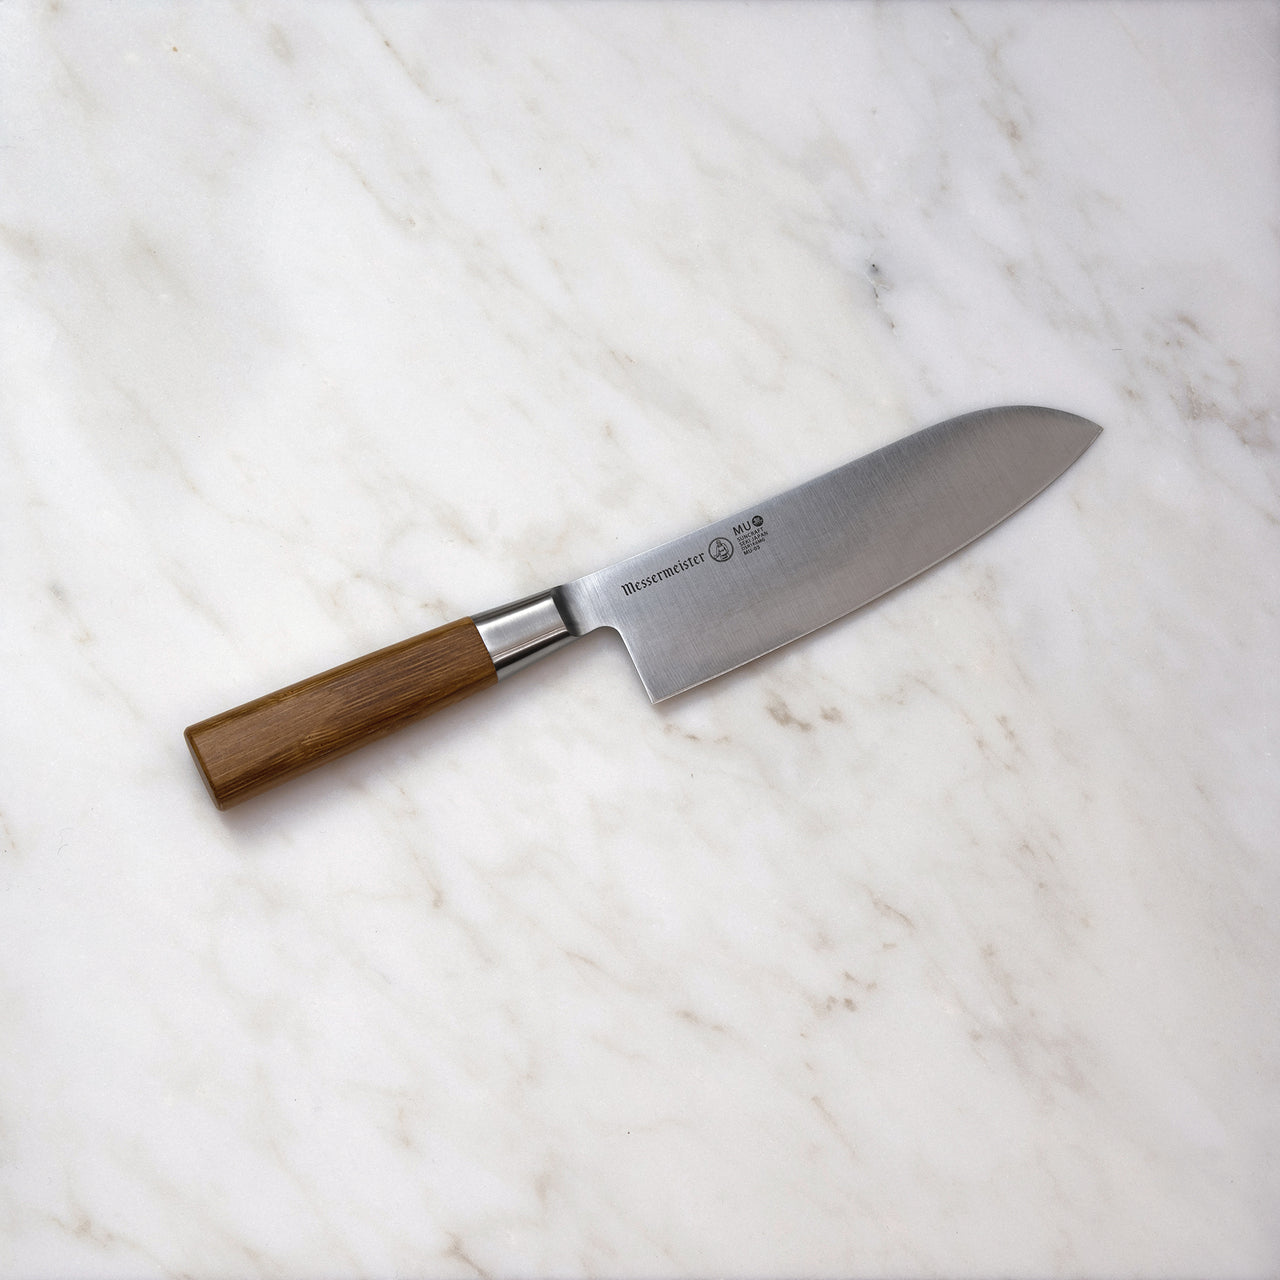 BEON.COM.AU MU 03      Mu Bamboo Santoku Knife The Messermeister Mu Bamboo 6.5" Santoku Knife, also known as a Japanese Chefs Knife, is a wide blade knife with an overall thinner spine and taper than a French or German style Chefs Knife. The thin taper (or blade thickness) is lengthened to give it maxim... Messermeister at BEON.COM.AU